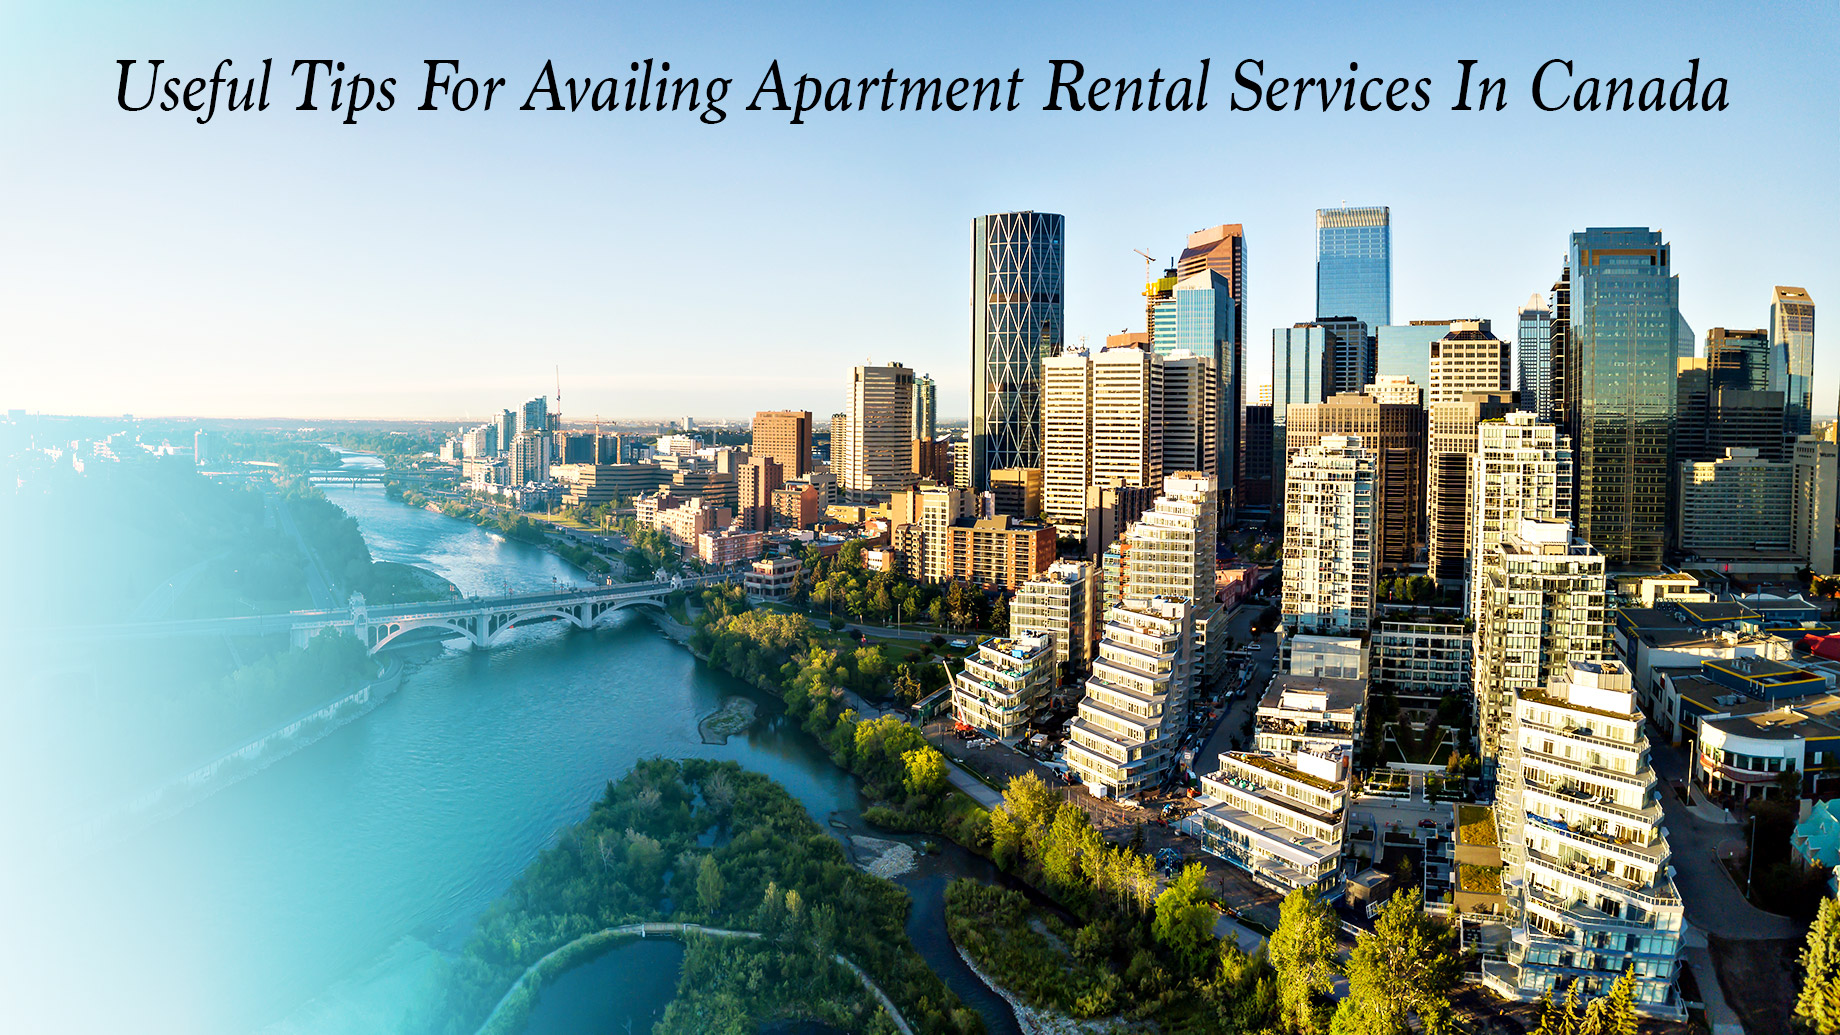 Useful Tips For Availing Apartment Rental Services In Canada